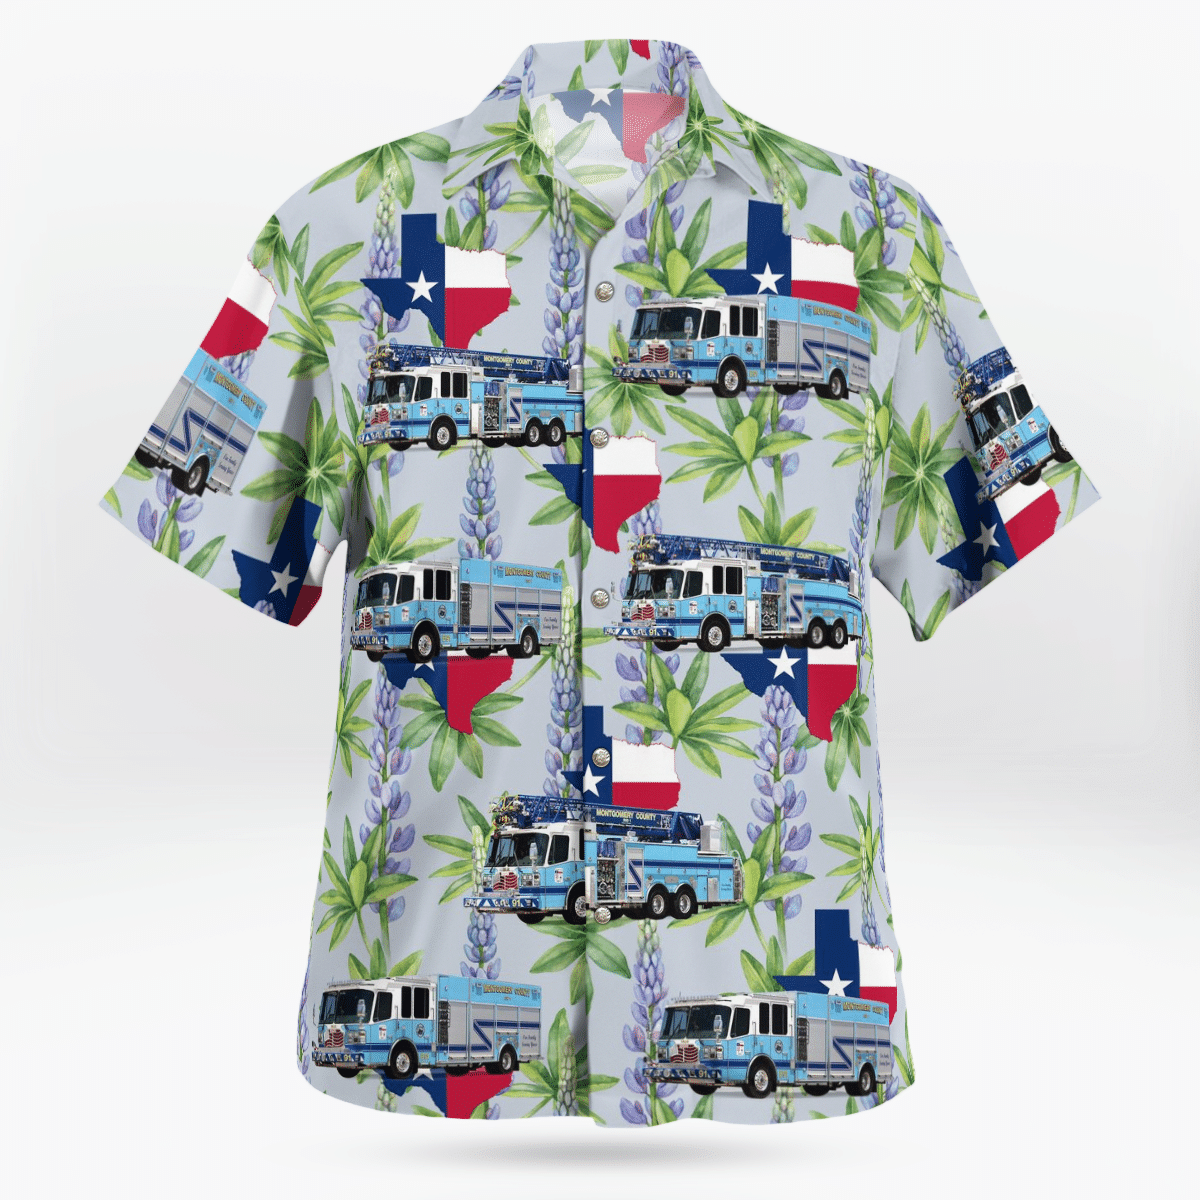 HOT Willis, Texas, Montgomery County ESD 1 Station 91 Willis Tropical Shirt2